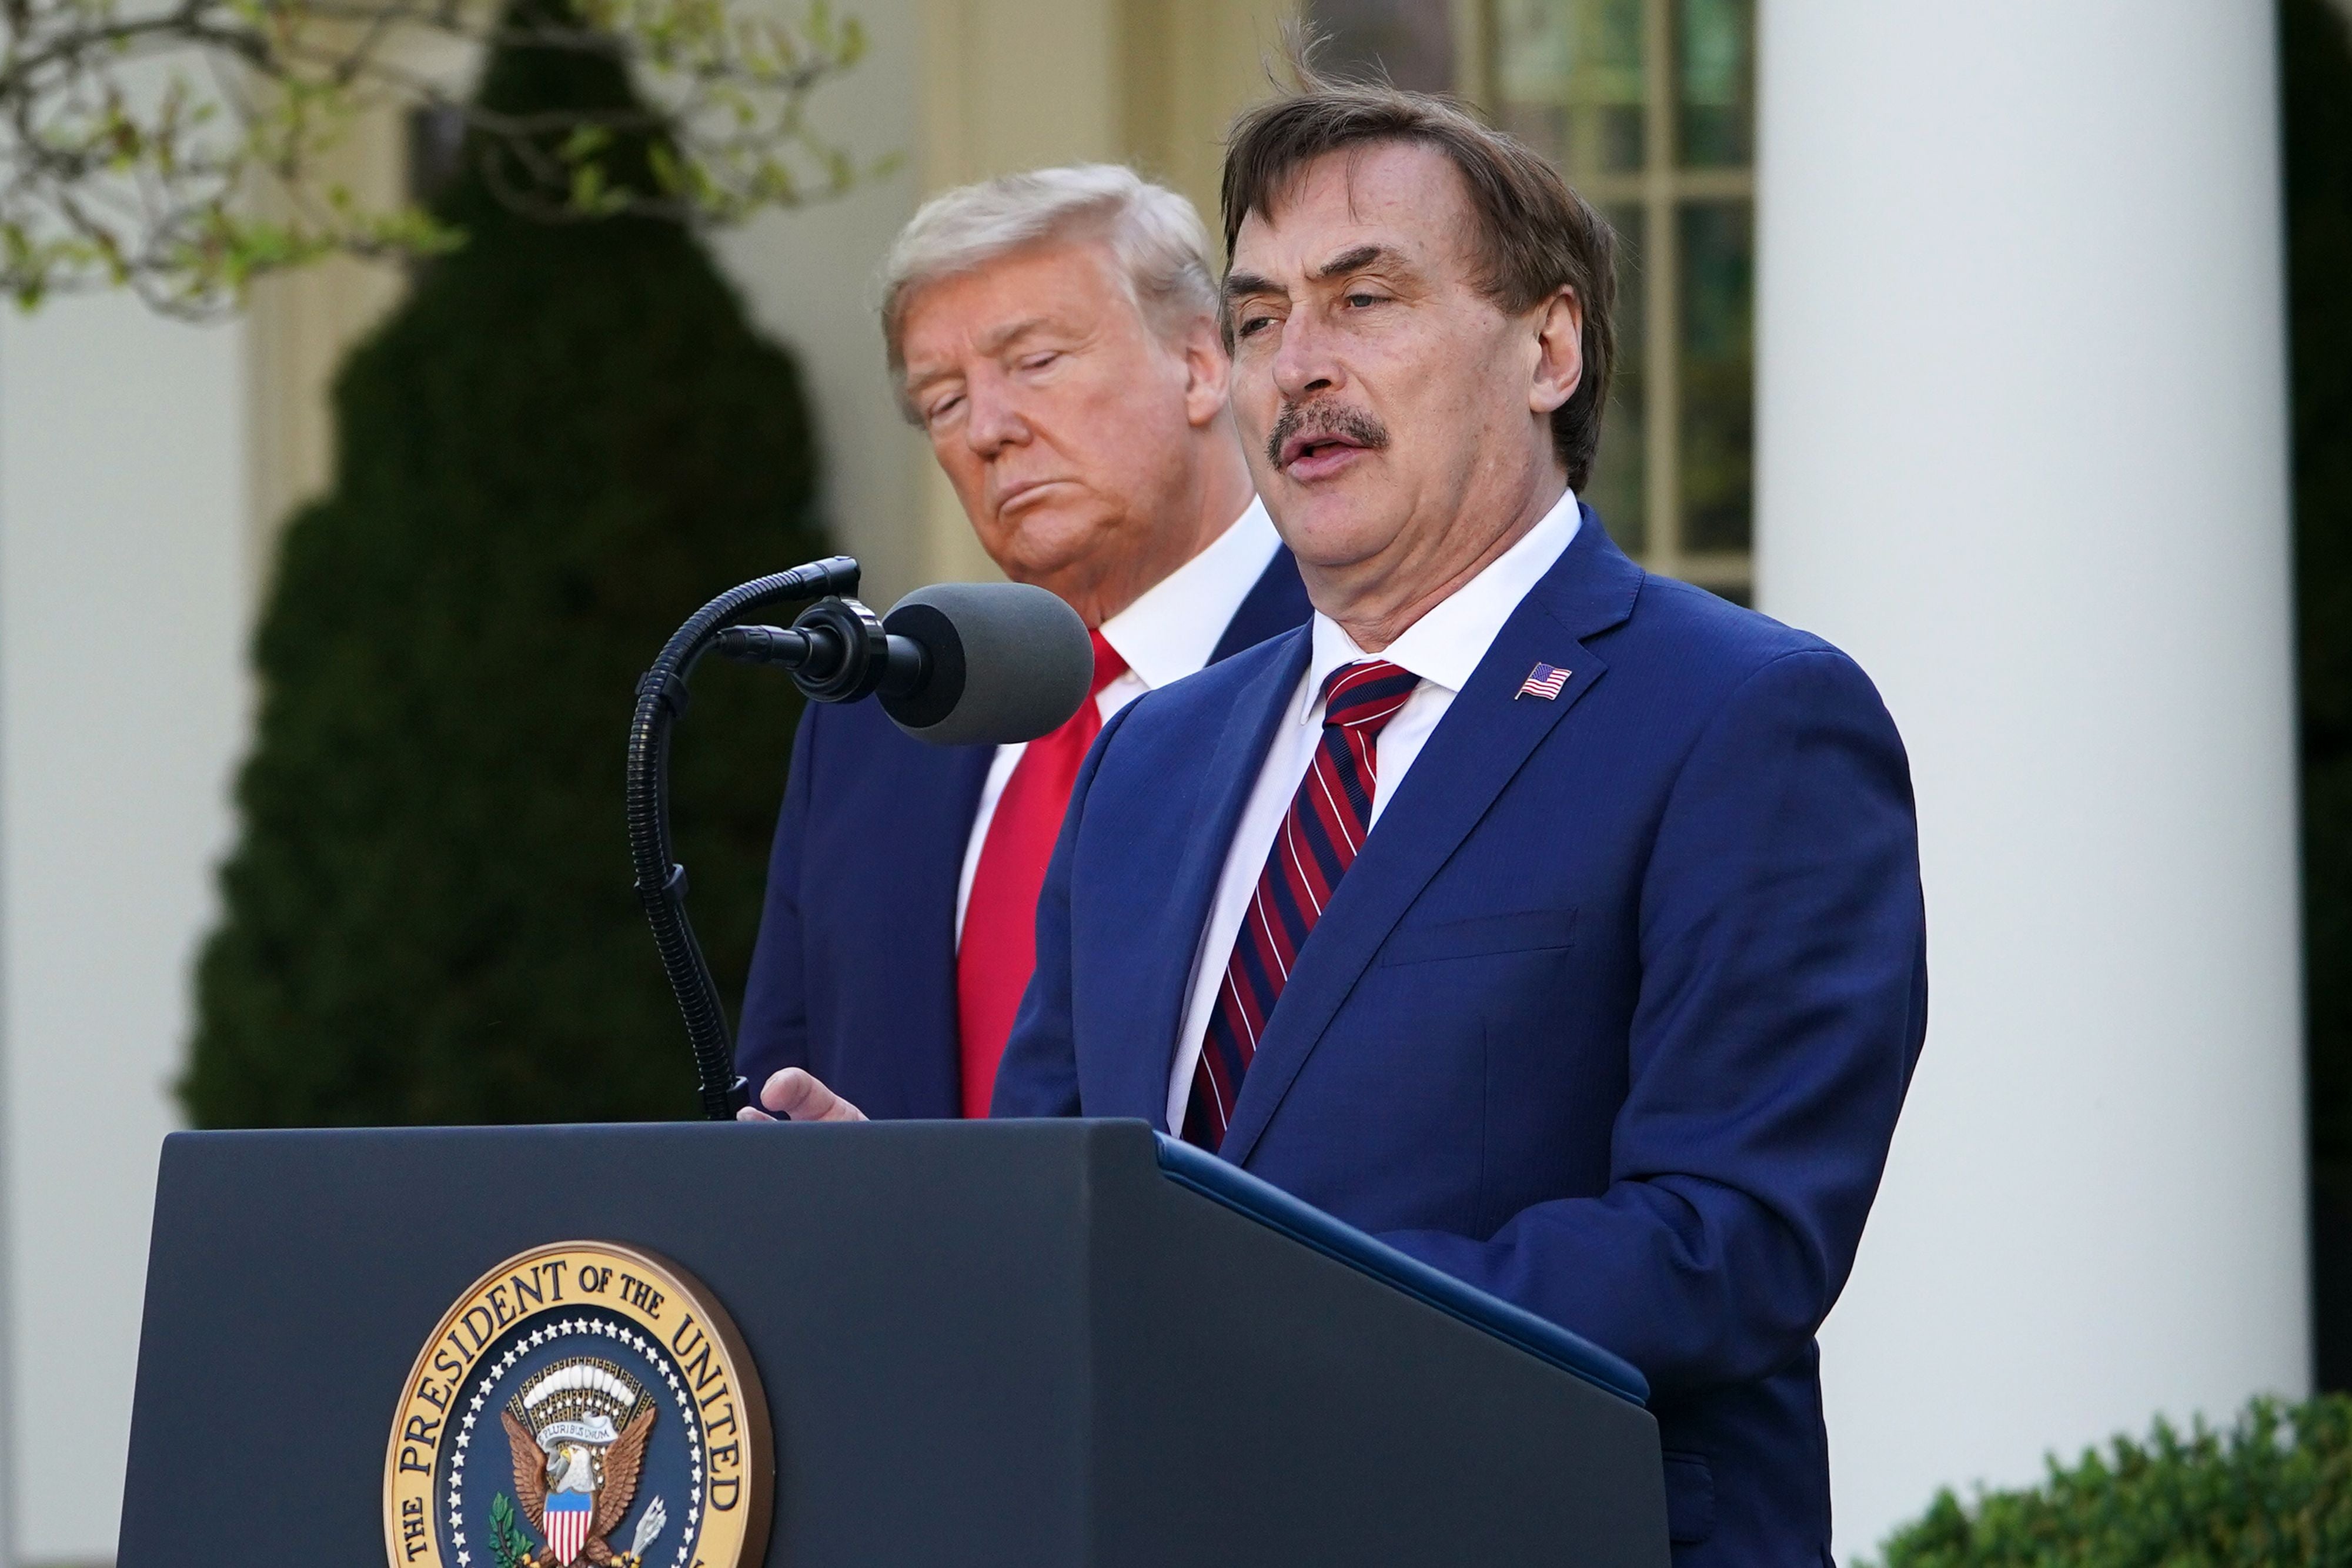 Donald Trump listens as Michael J. Lindell, CEO of MyPillow Inc., speaks during the daily briefing on the novel coronavirus, COVID-19, in the Rose Garden of the White House in Washington, DC, on March 30, 2020